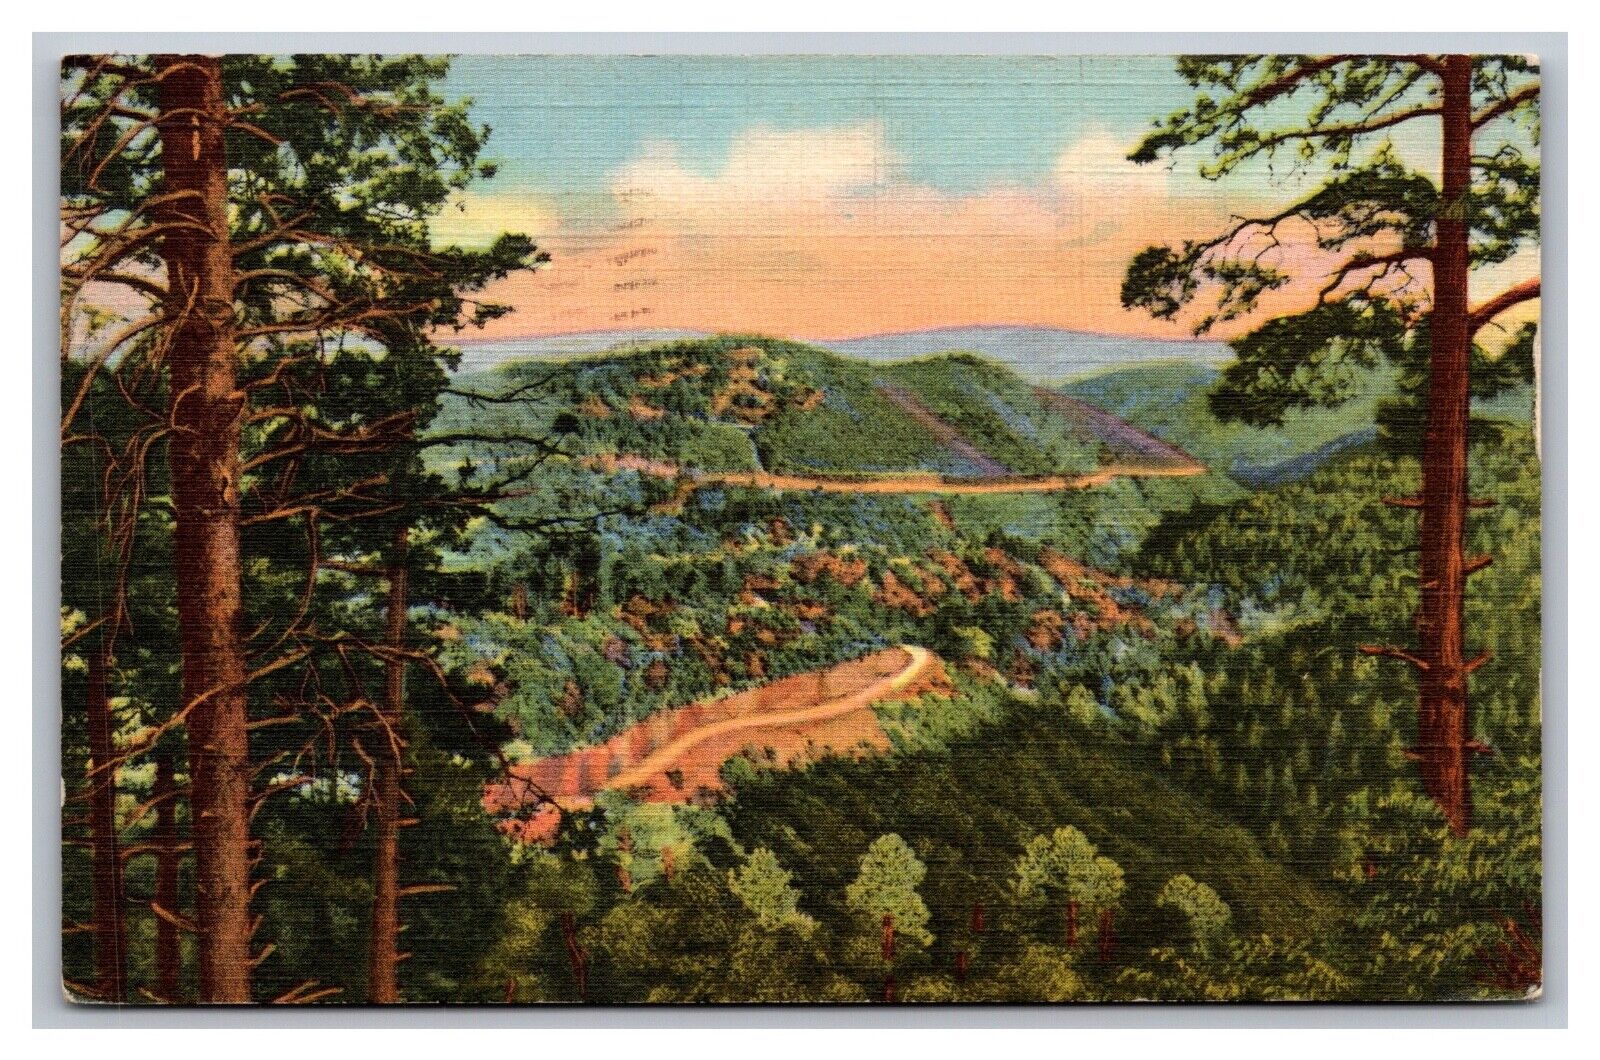 Silver City Hot Springs NM Black Range Scenic Highway Linen Postcard Posted 1946